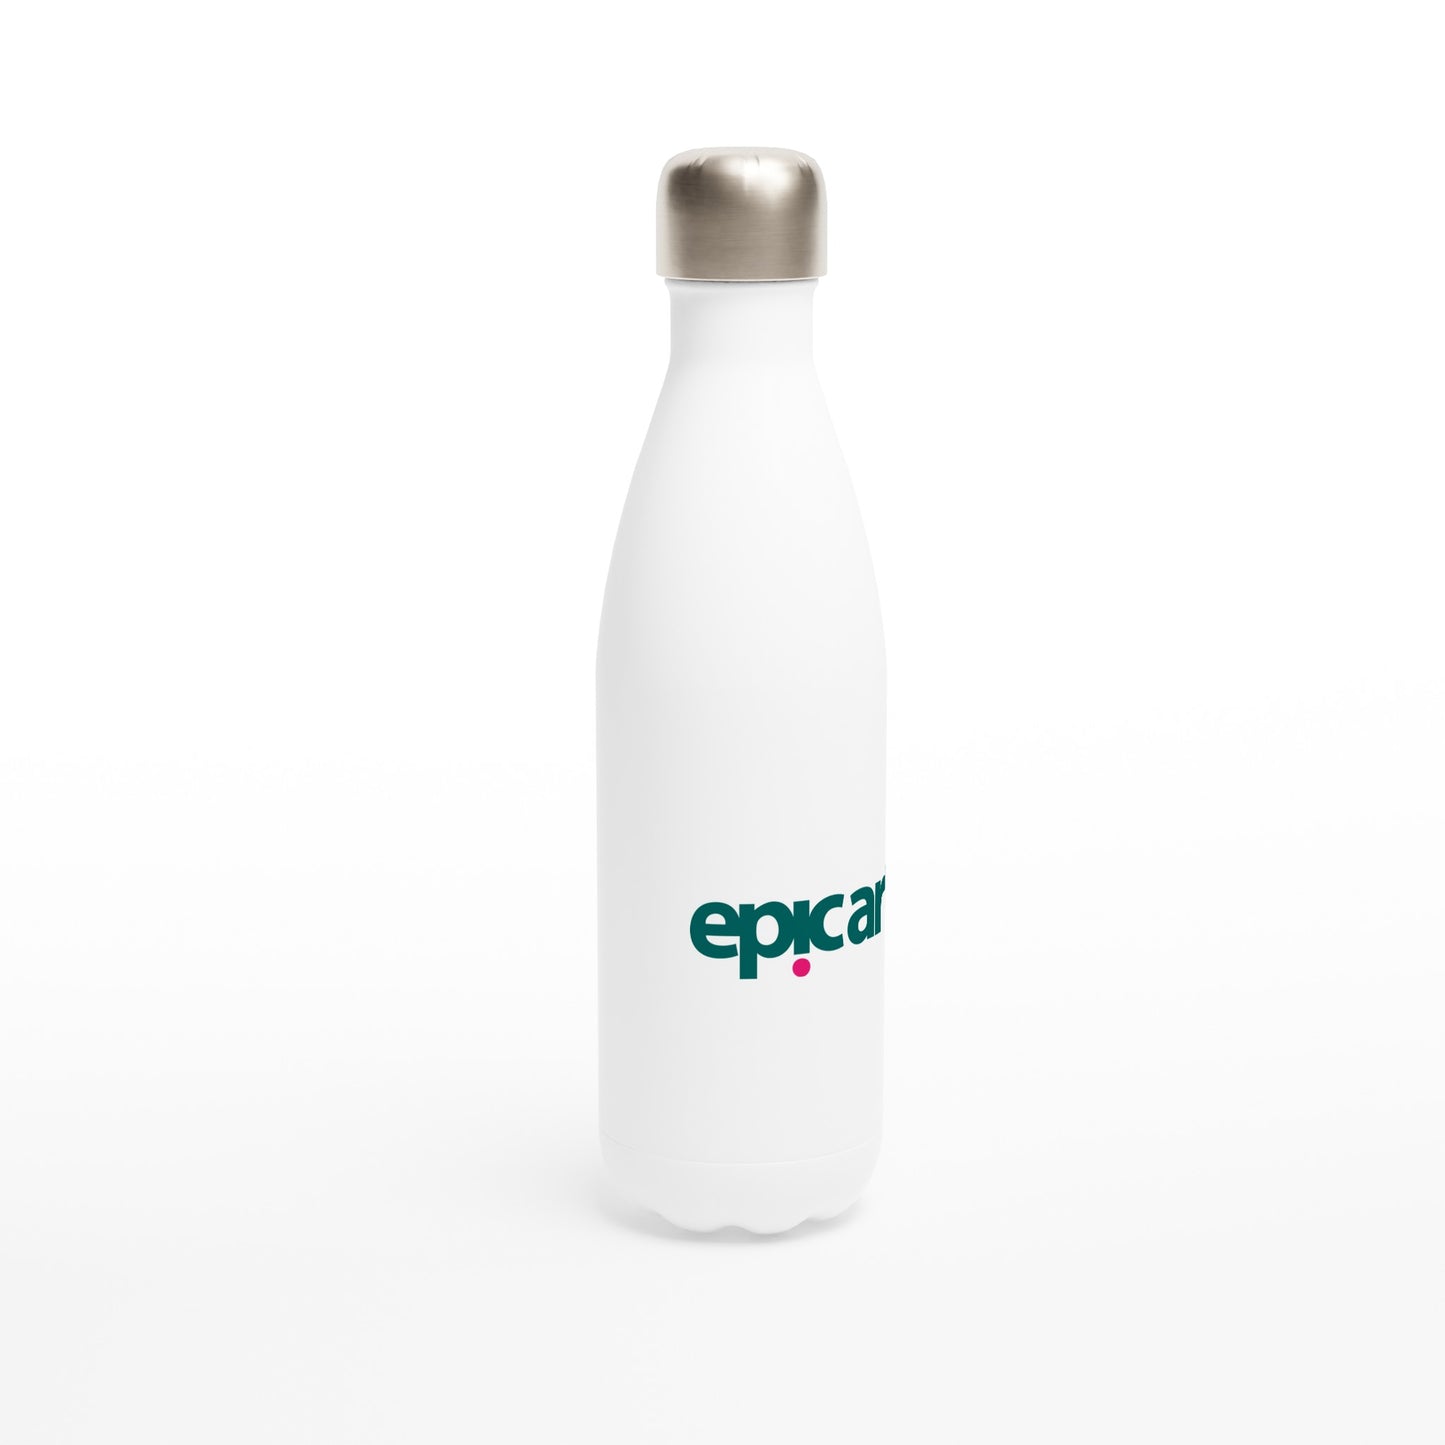 Epic Arts 17oz Stainless Steel Water Bottle